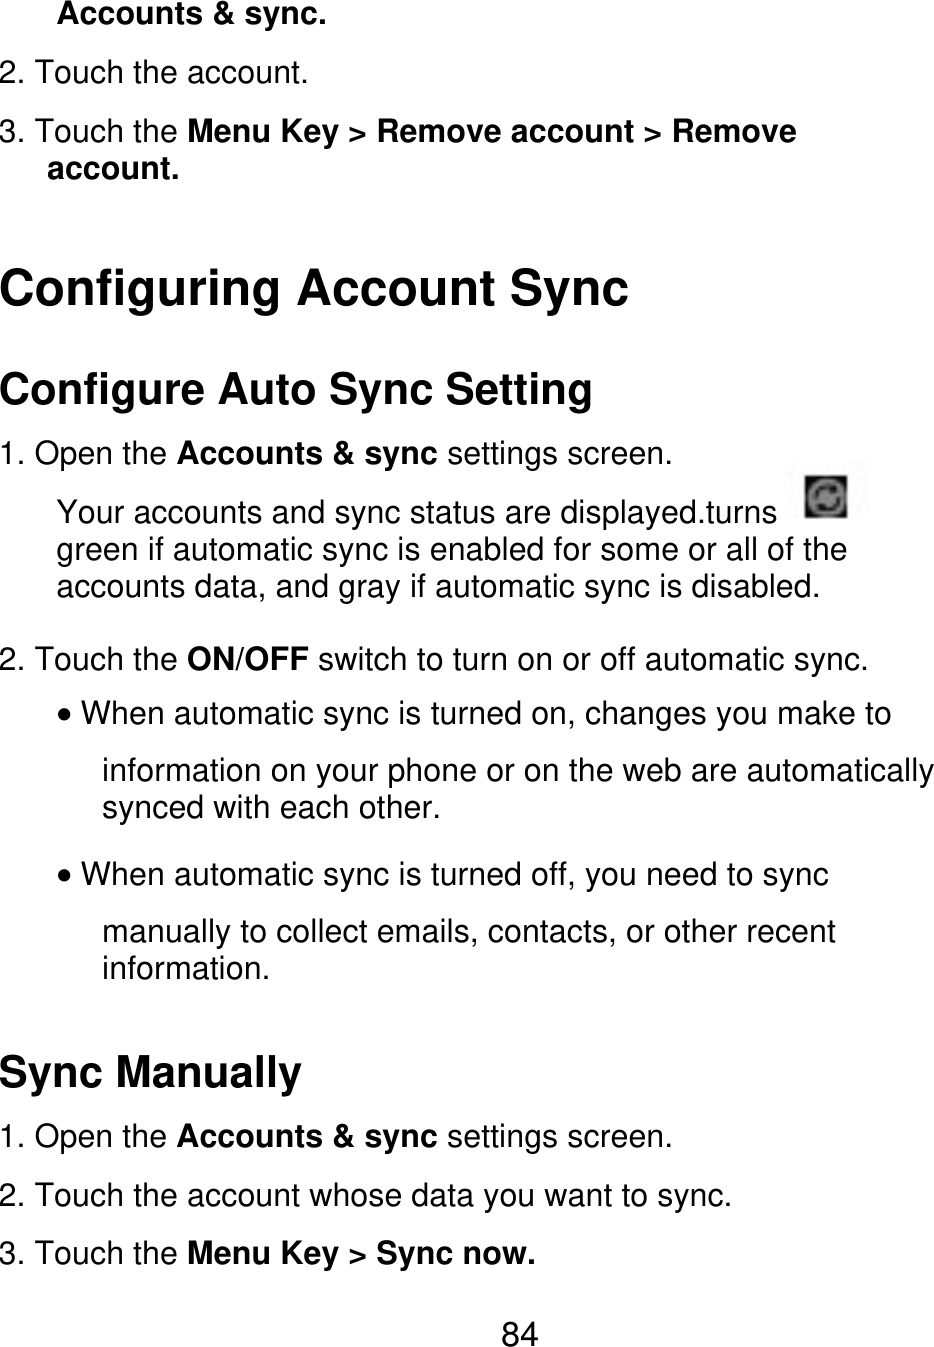 Accounts &amp; sync. 2. Touch the account. 3. Touch the Menu Key &gt; Remove account &gt; Remove    account. Configuring Account Sync Configure Auto Sync Setting 1. Open the Accounts &amp; sync settings screen. Your accounts and sync status are displayed.turns green if automatic sync is enabled for some or all of the accounts data, and gray if automatic sync is disabled. 2. Touch the ON/OFF switch to turn on or off automatic sync. When automatic sync is turned on, changes you make to information on your phone or on the web are automatically synced with each other. When automatic sync is turned off, you need to sync manually to collect emails, contacts, or other recent information. Sync Manually 1. Open the Accounts &amp; sync settings screen. 2. Touch the account whose data you want to sync. 3. Touch the Menu Key &gt; Sync now. 84 